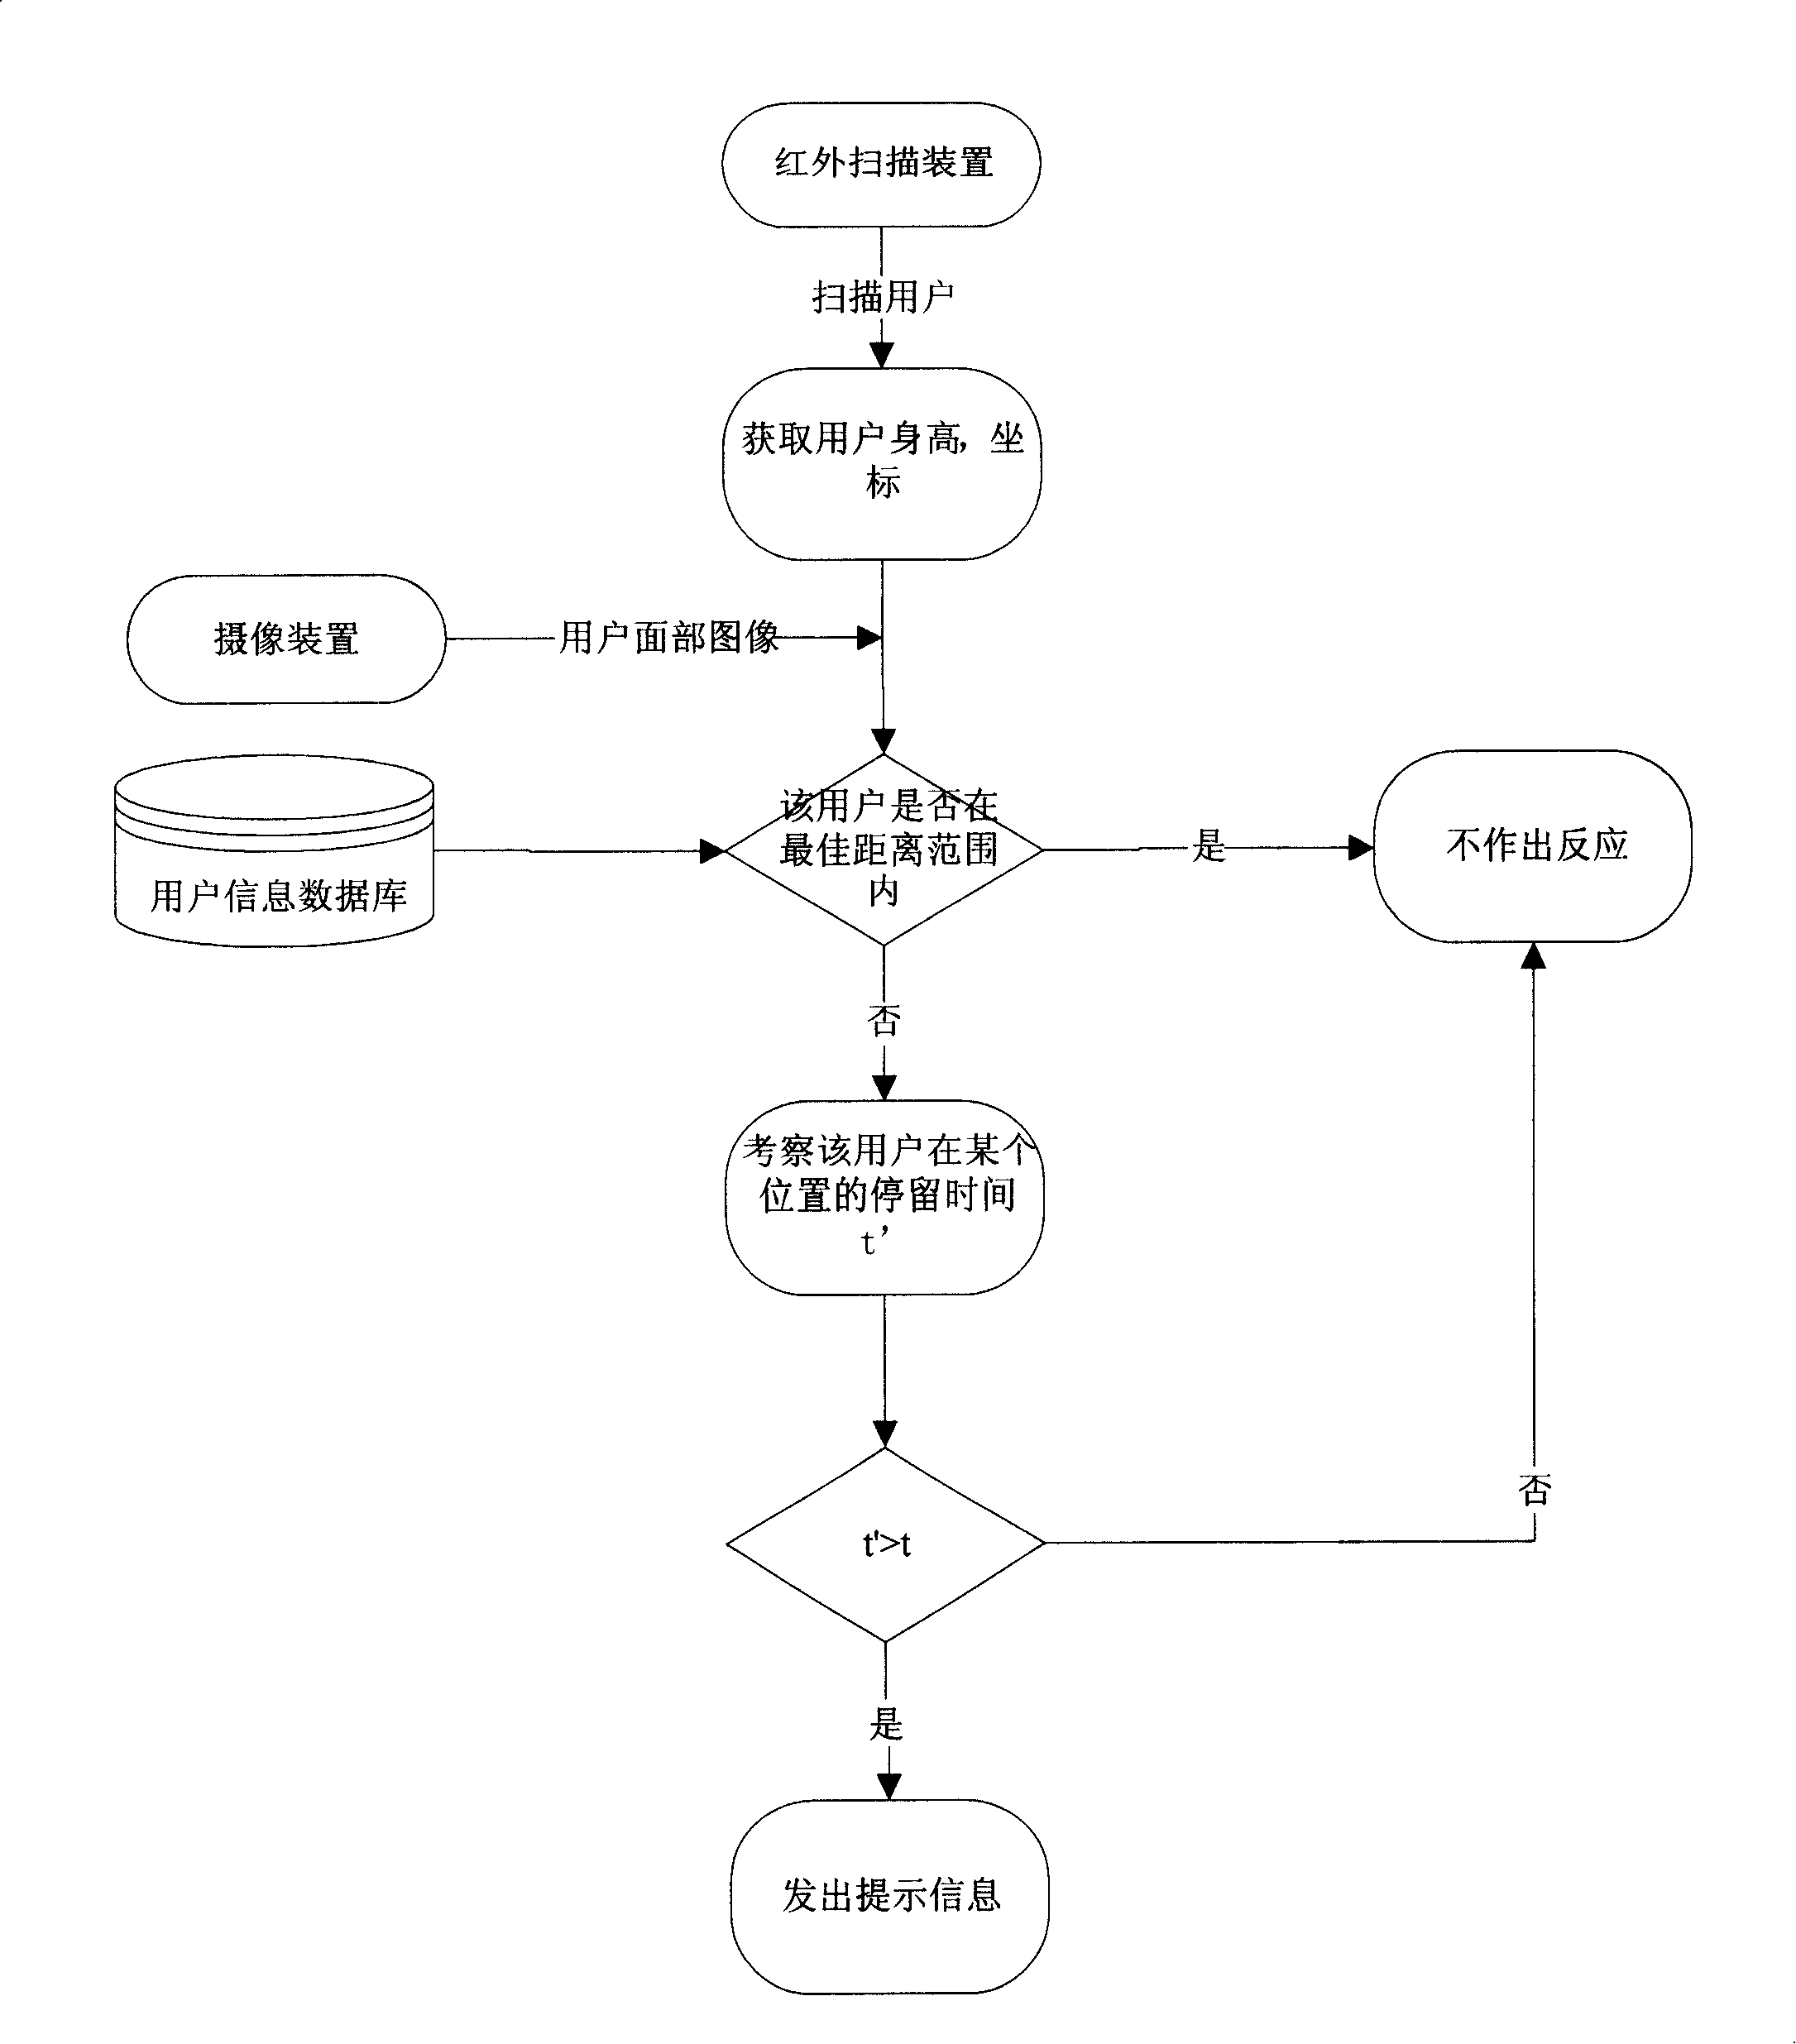 Device of controlling receiving destance and authority for digital TV set